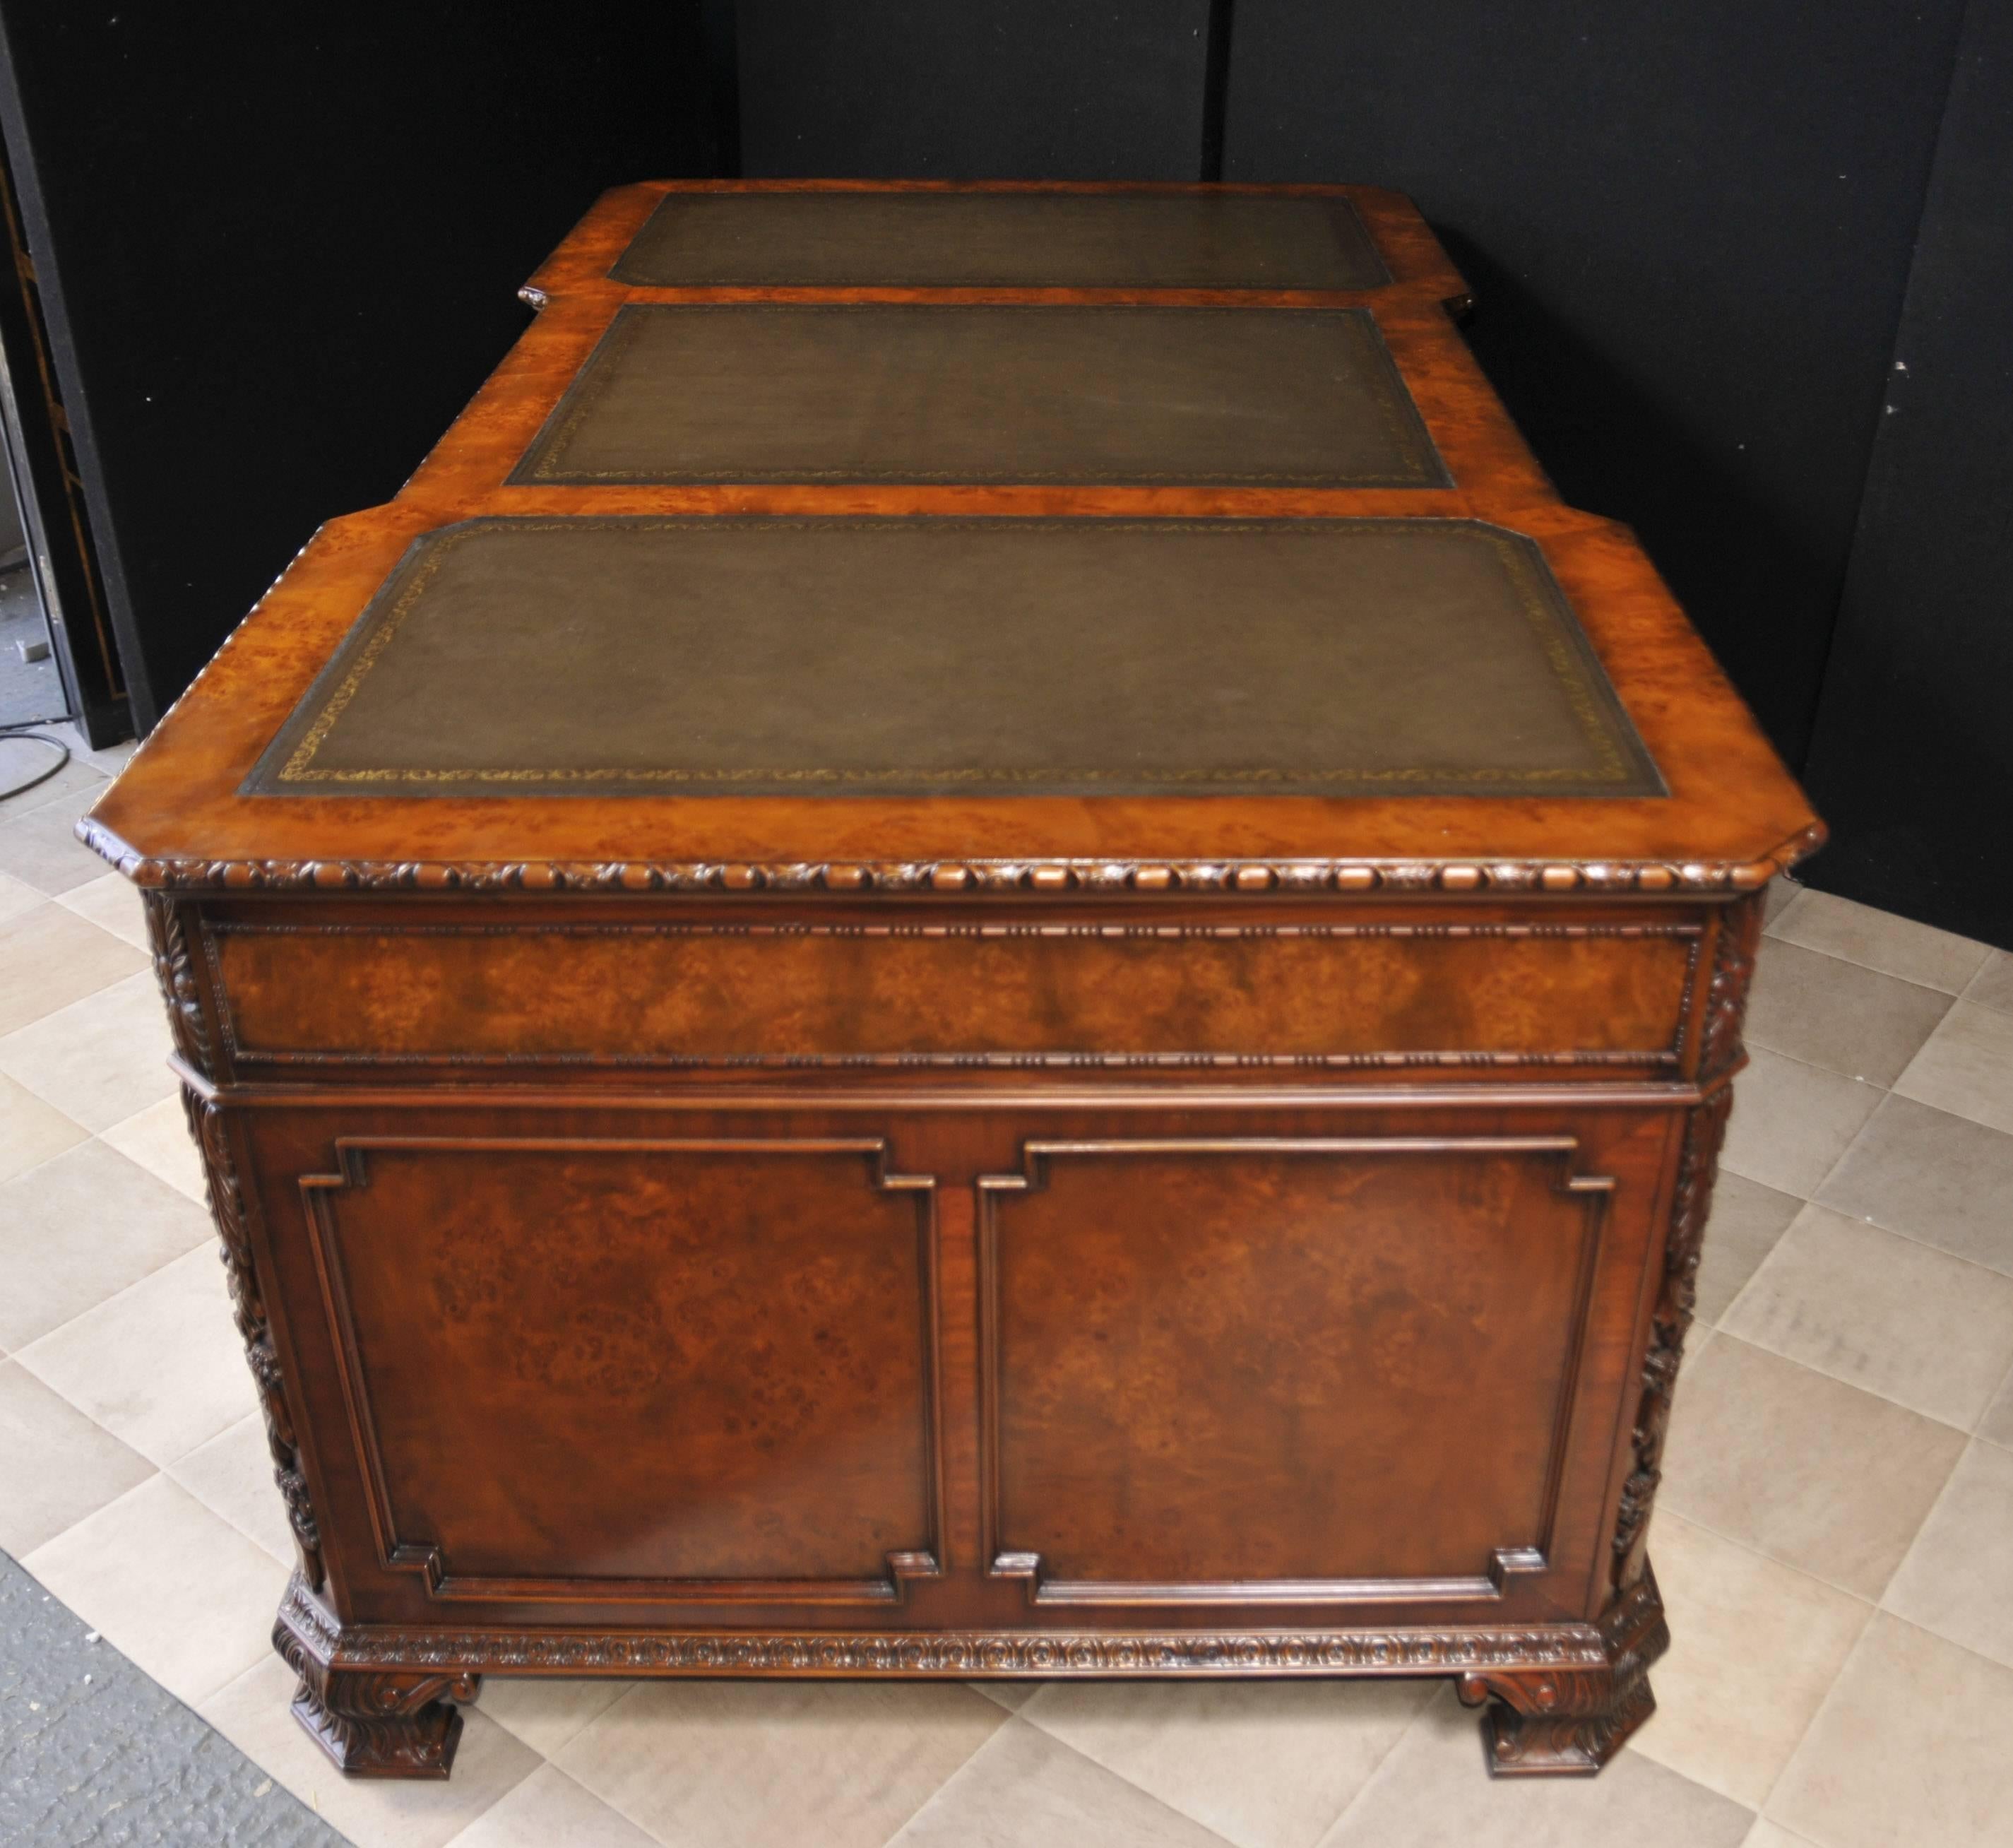 Walnut Regency Style Partnters Desk Walnut Carved Writing Table In Excellent Condition For Sale In Potters Bar, Herts